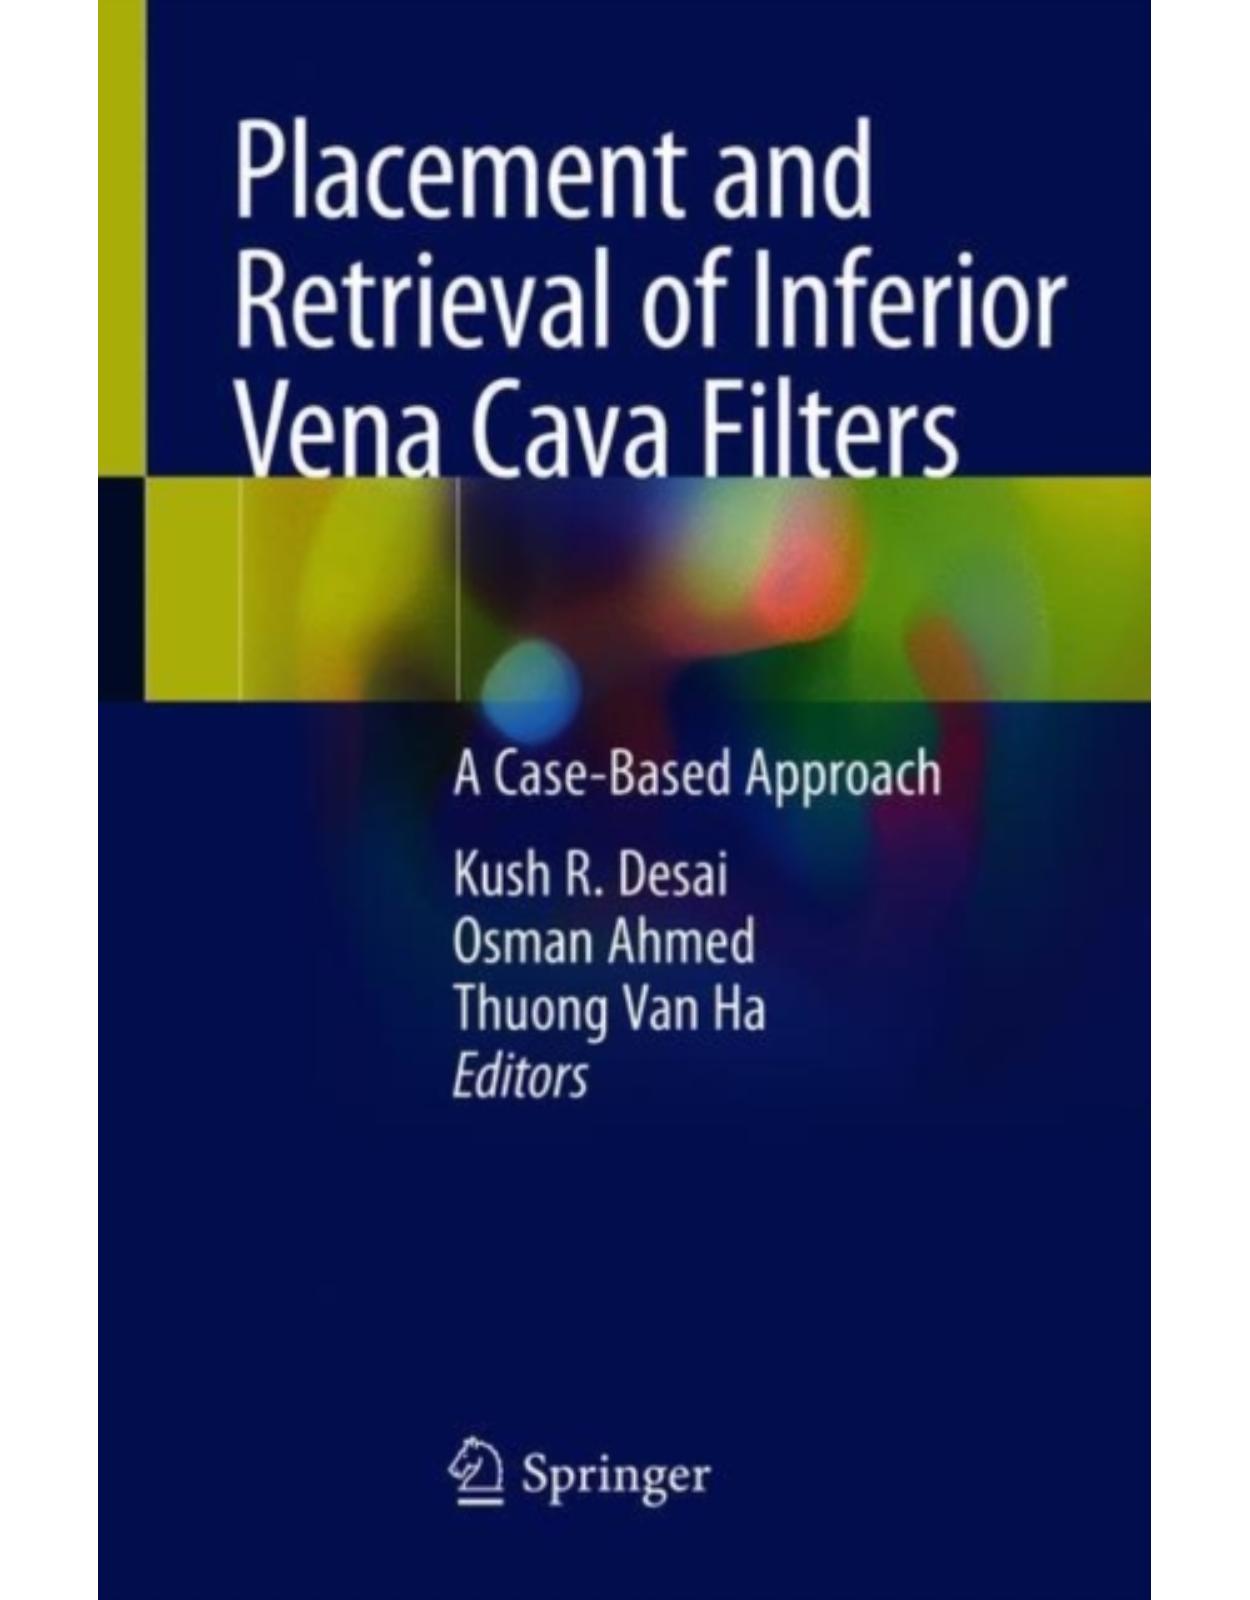 Placement and Retrieval of Inferior Vena Cava Filters